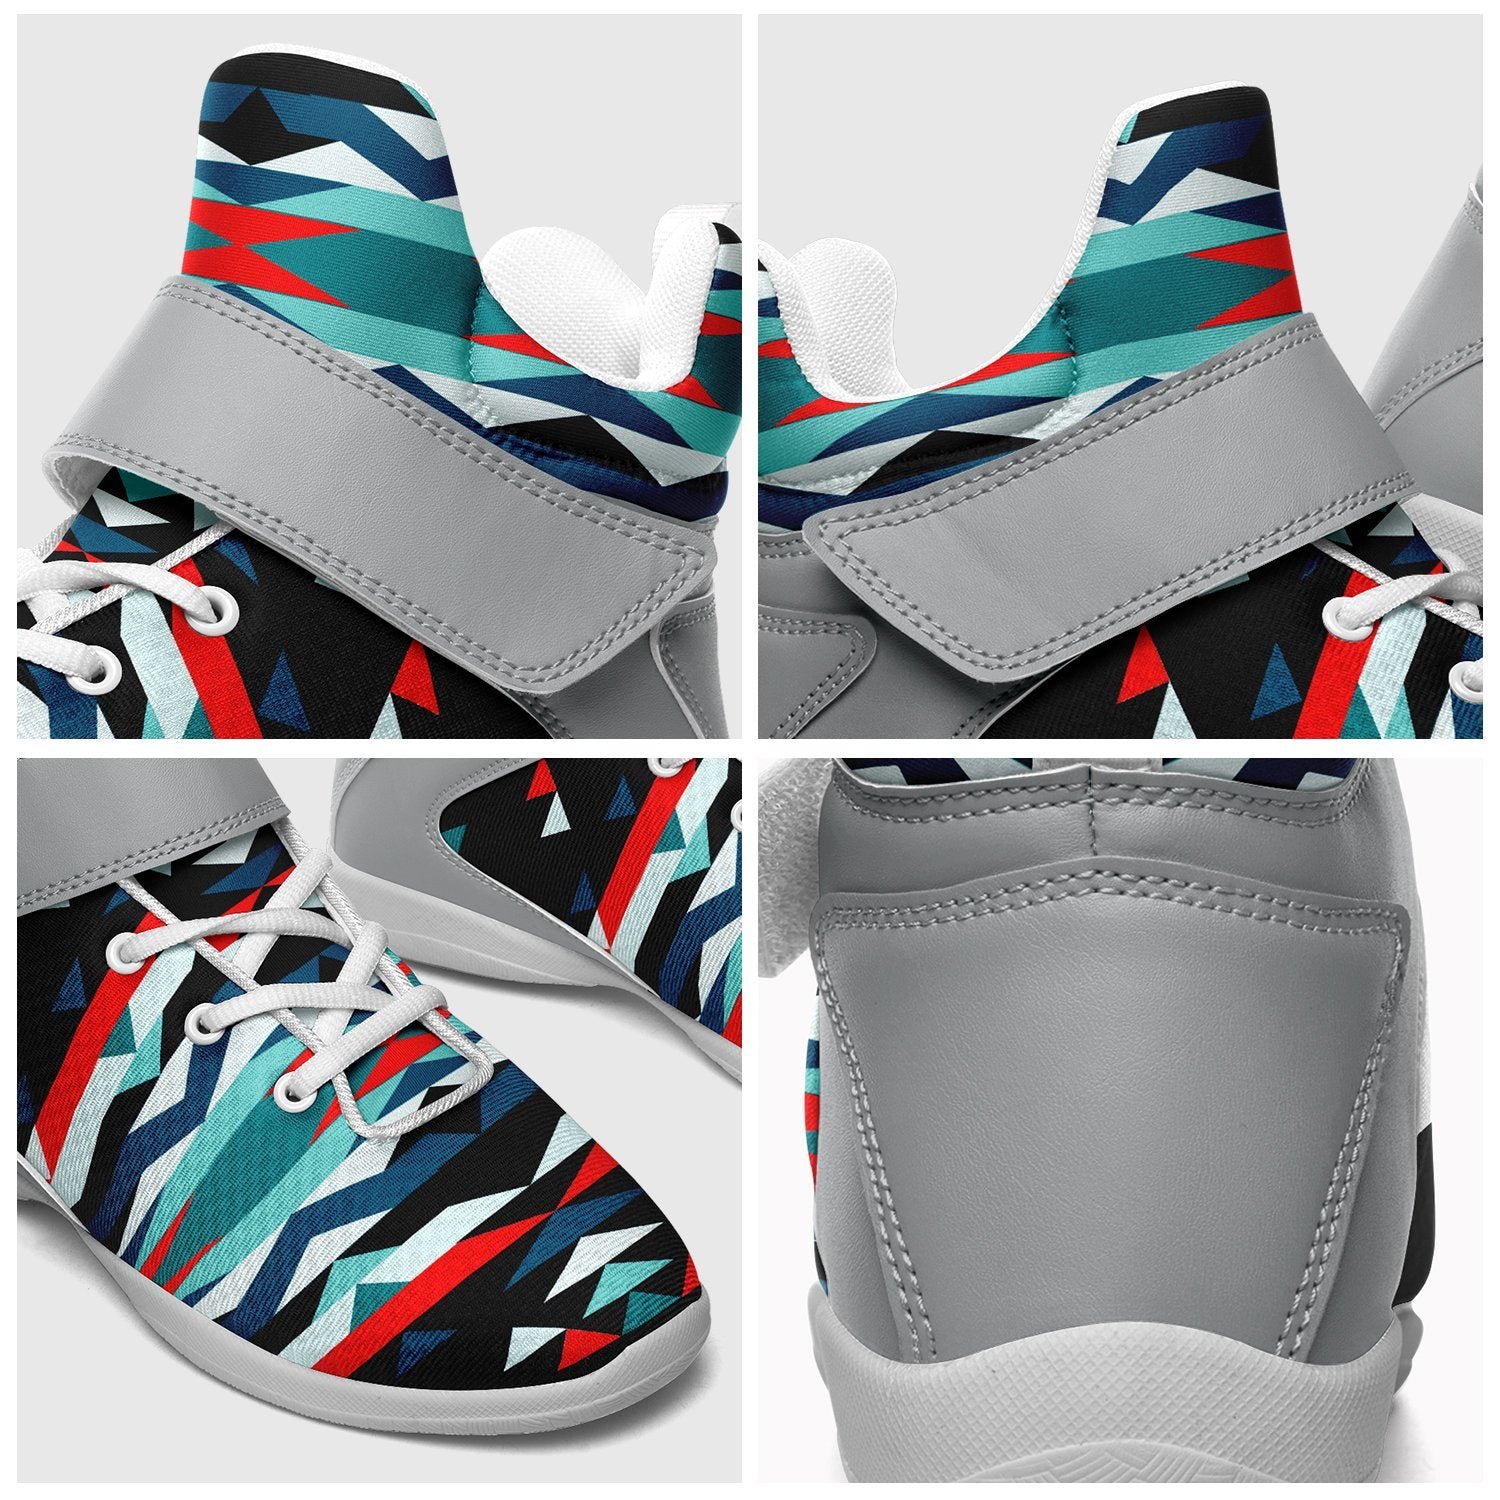 Visions of Peaceful Nights Ipottaa Basketball / Sport High Top Shoes 49 Dzine 